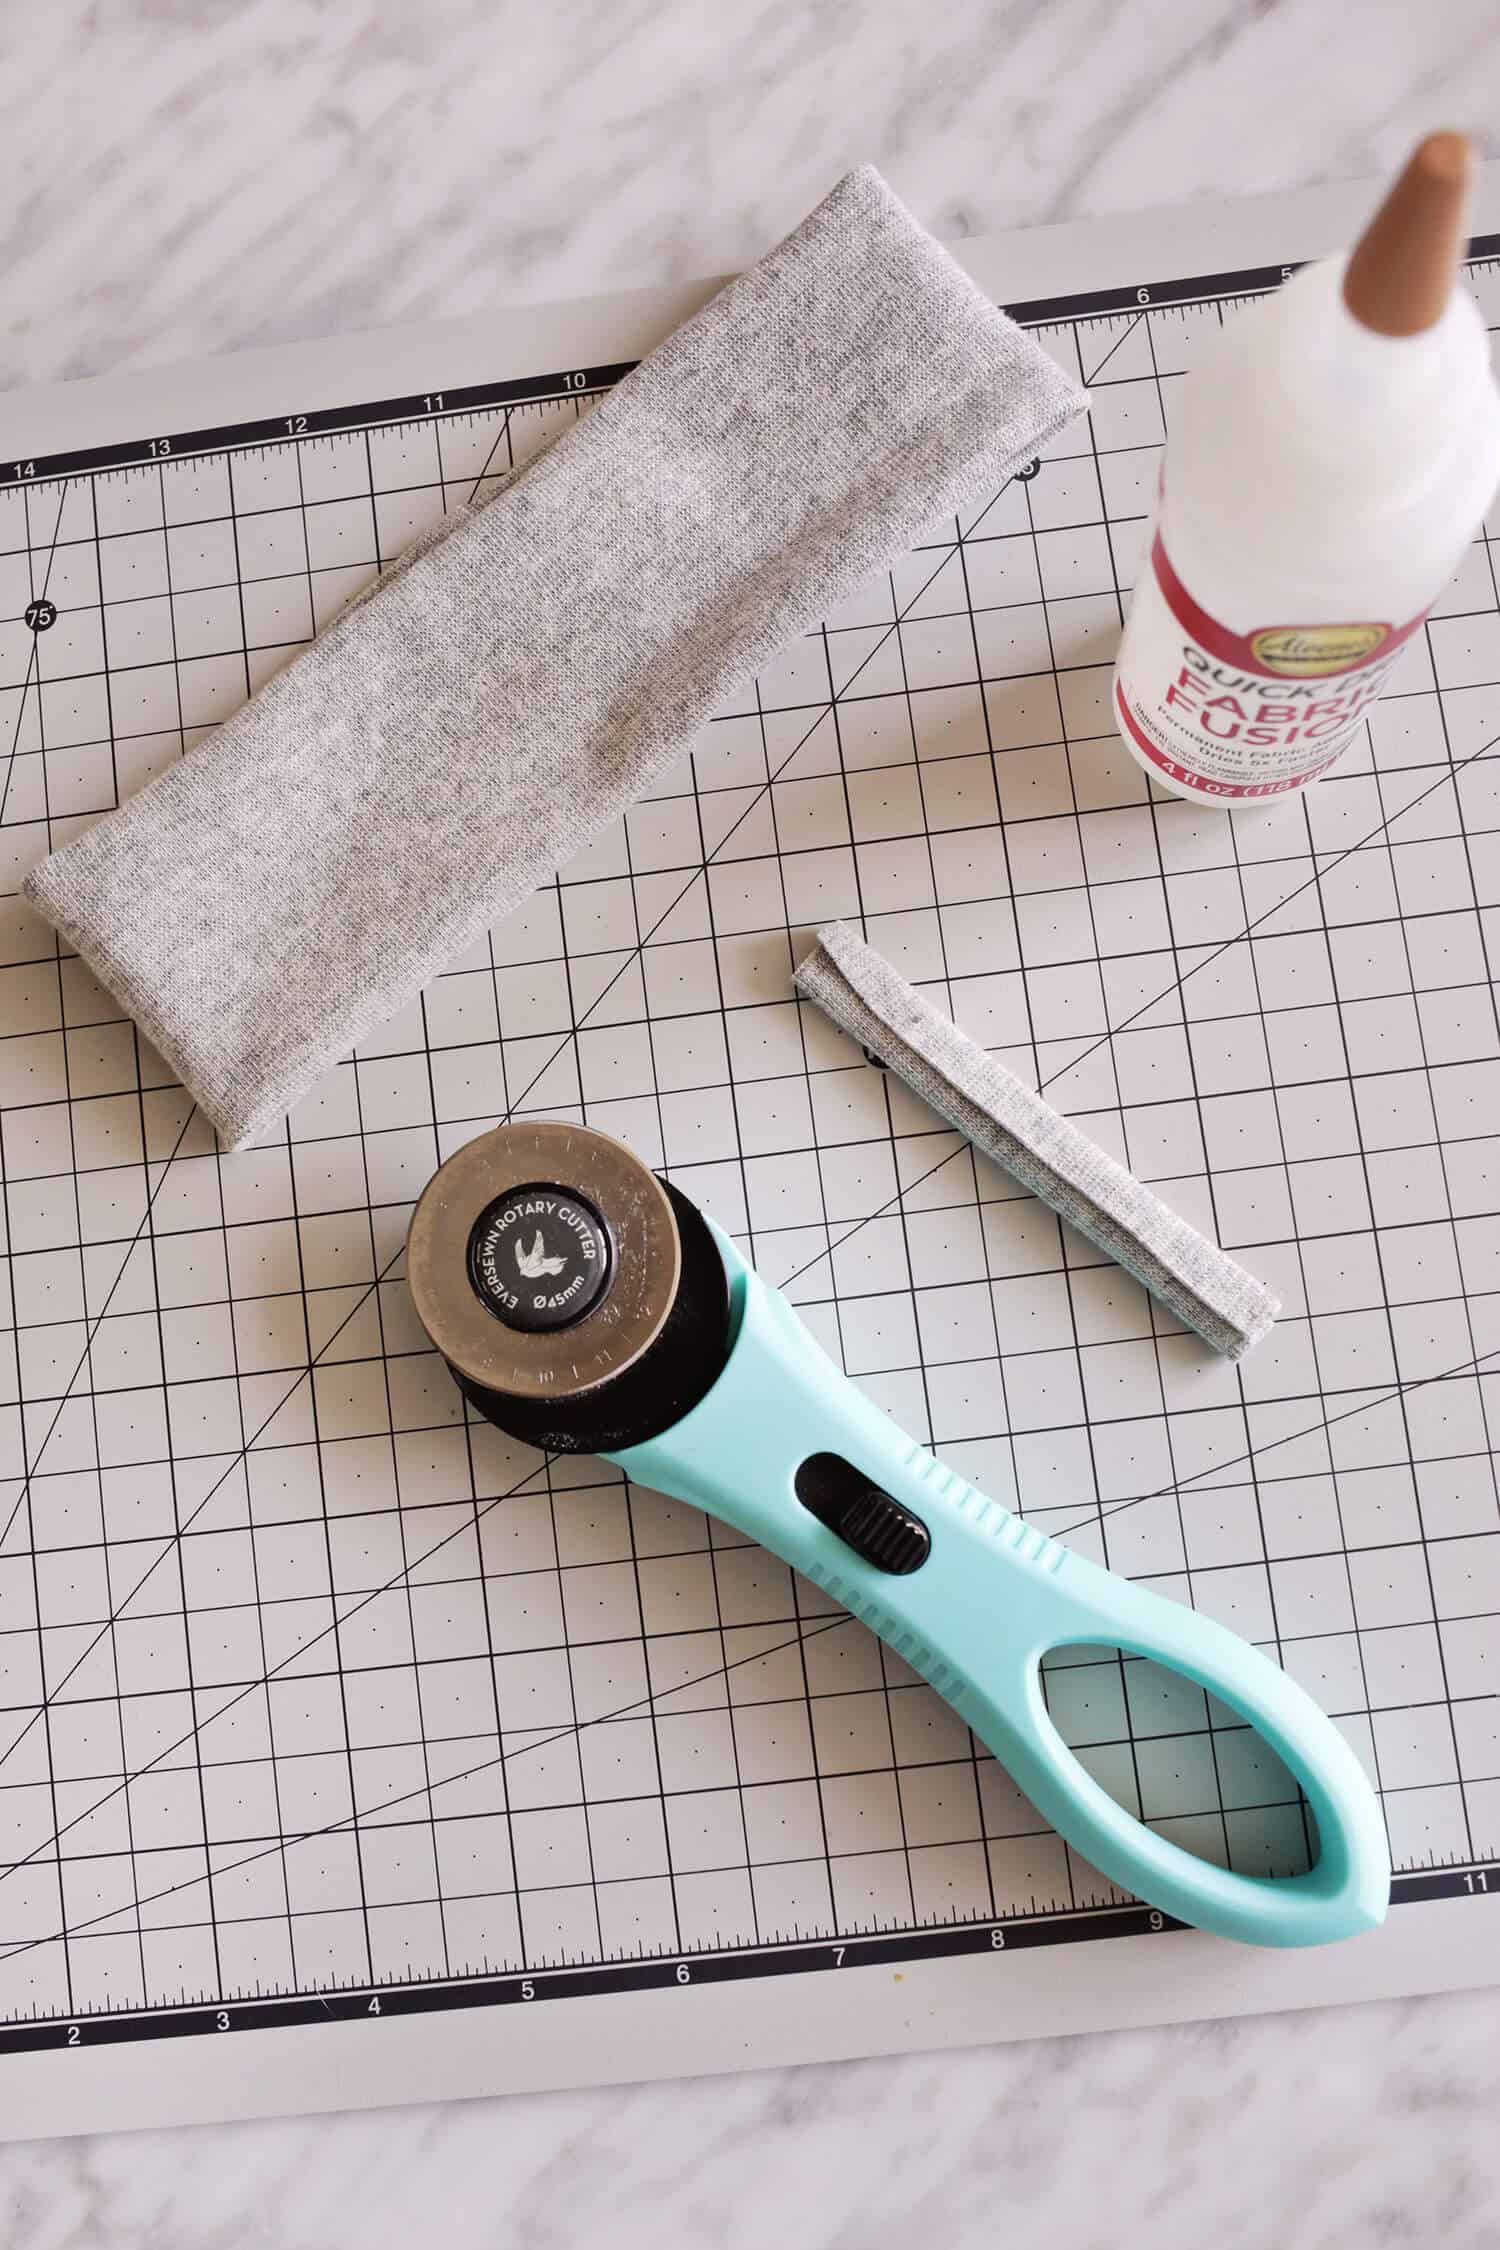 rotary cutter, glue and fabric on mat